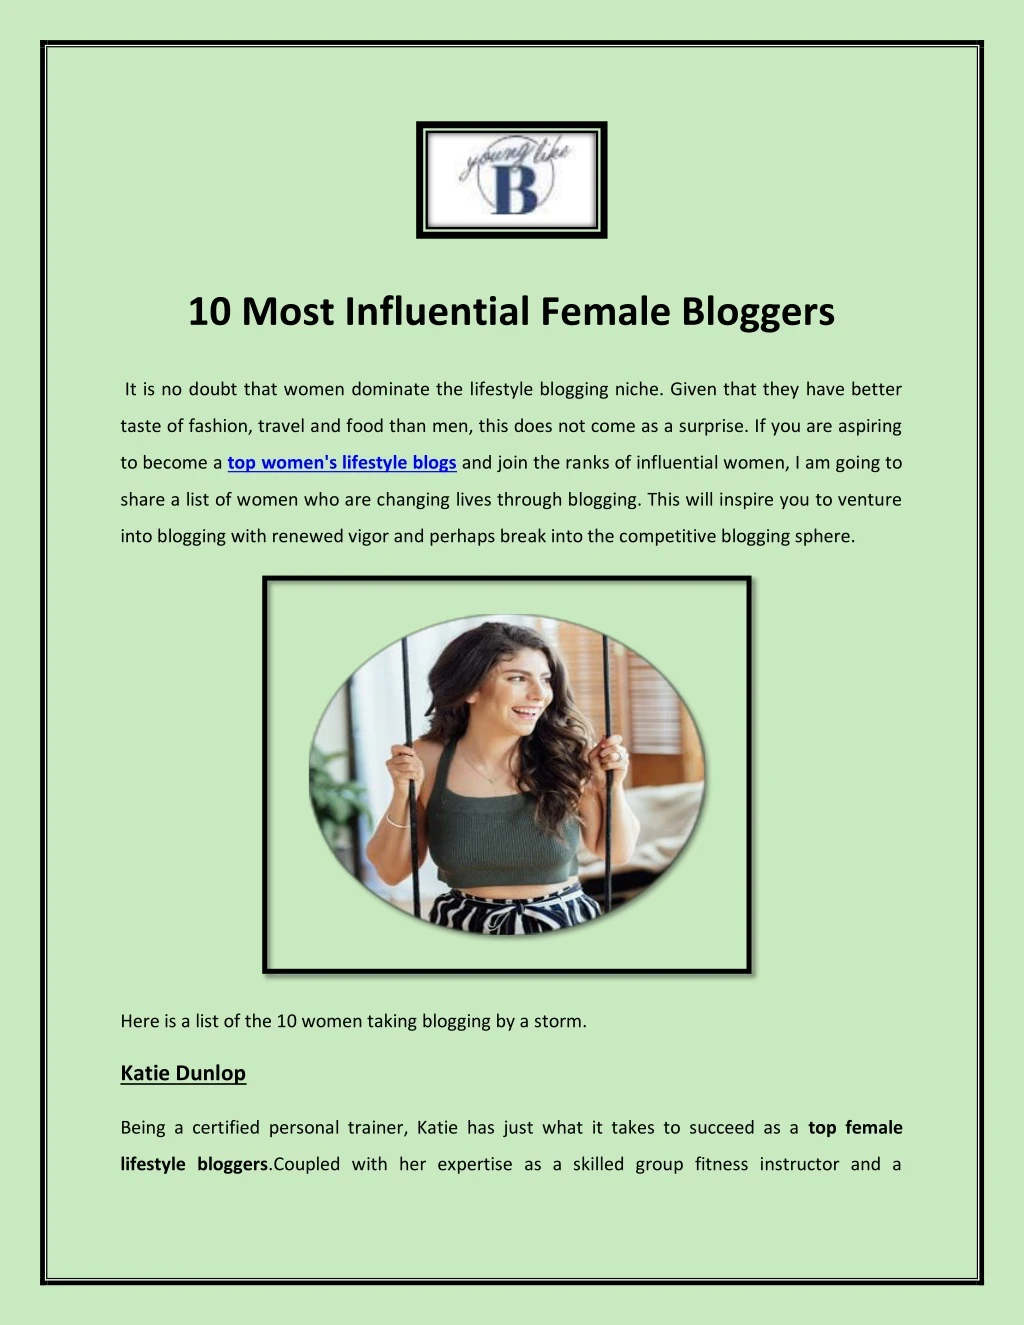 10 most influential female bloggers